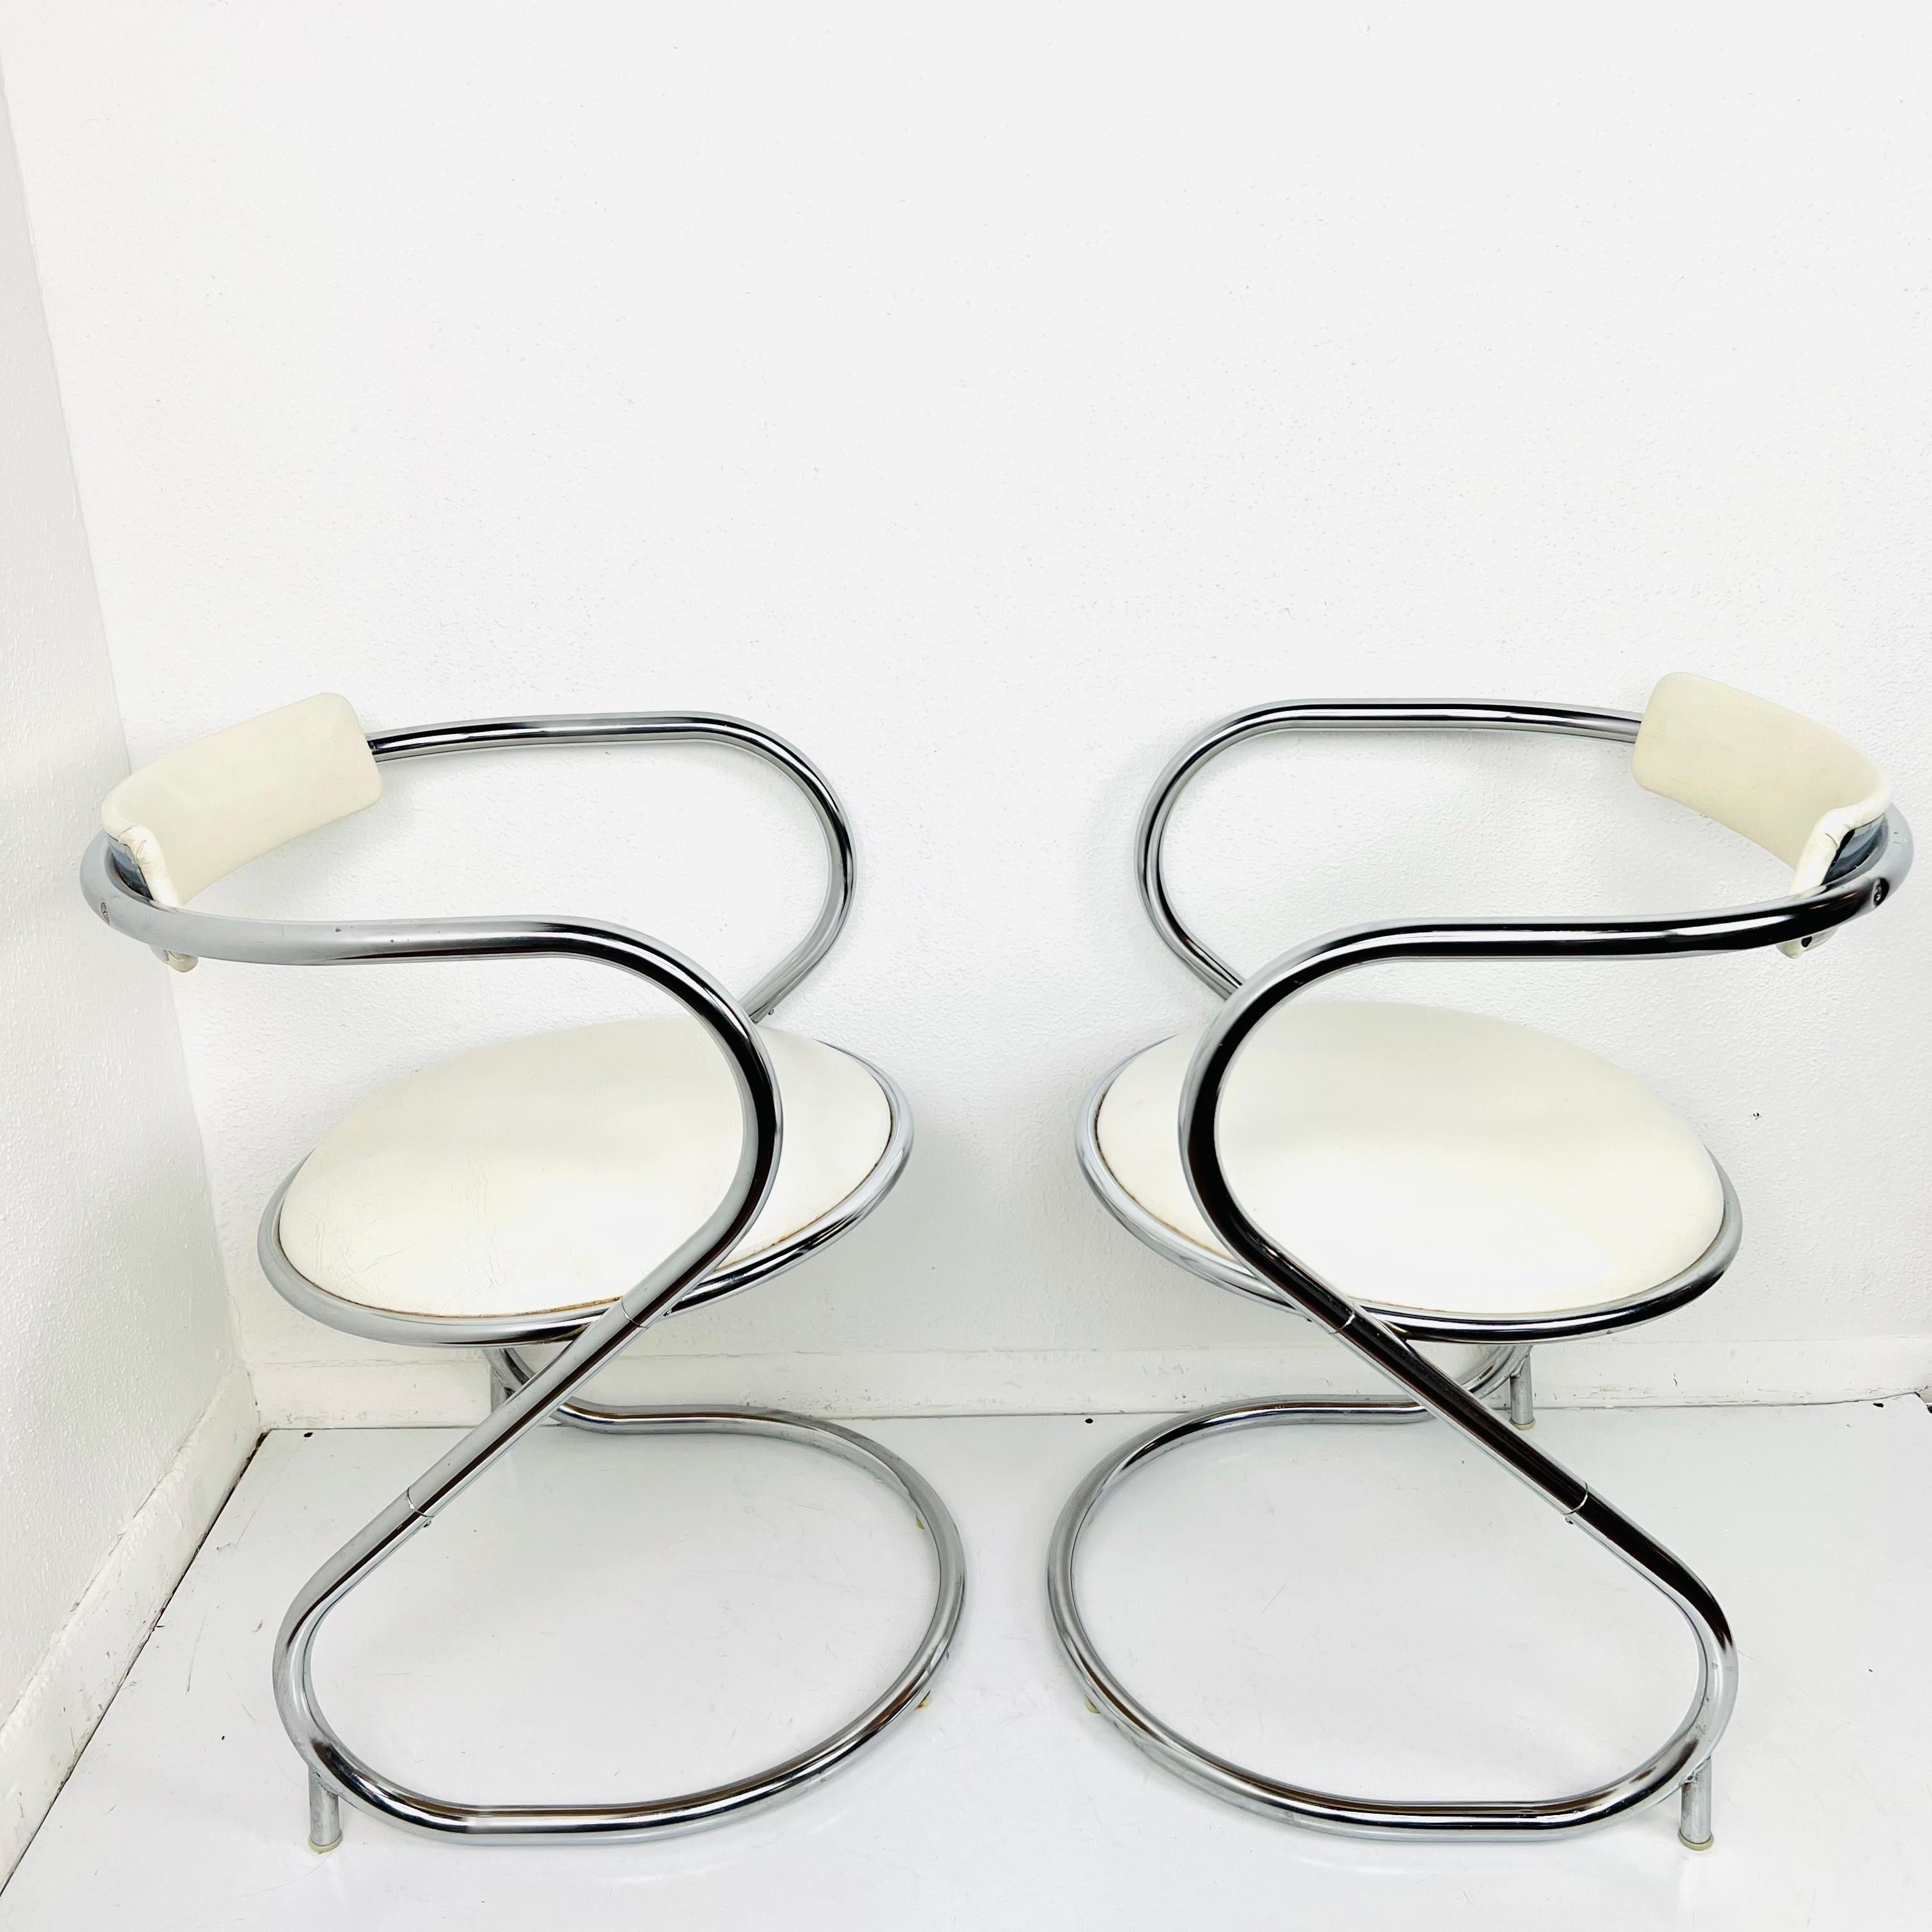 North American Pair of Midcentury Chrome Cantilever Chairs For Sale